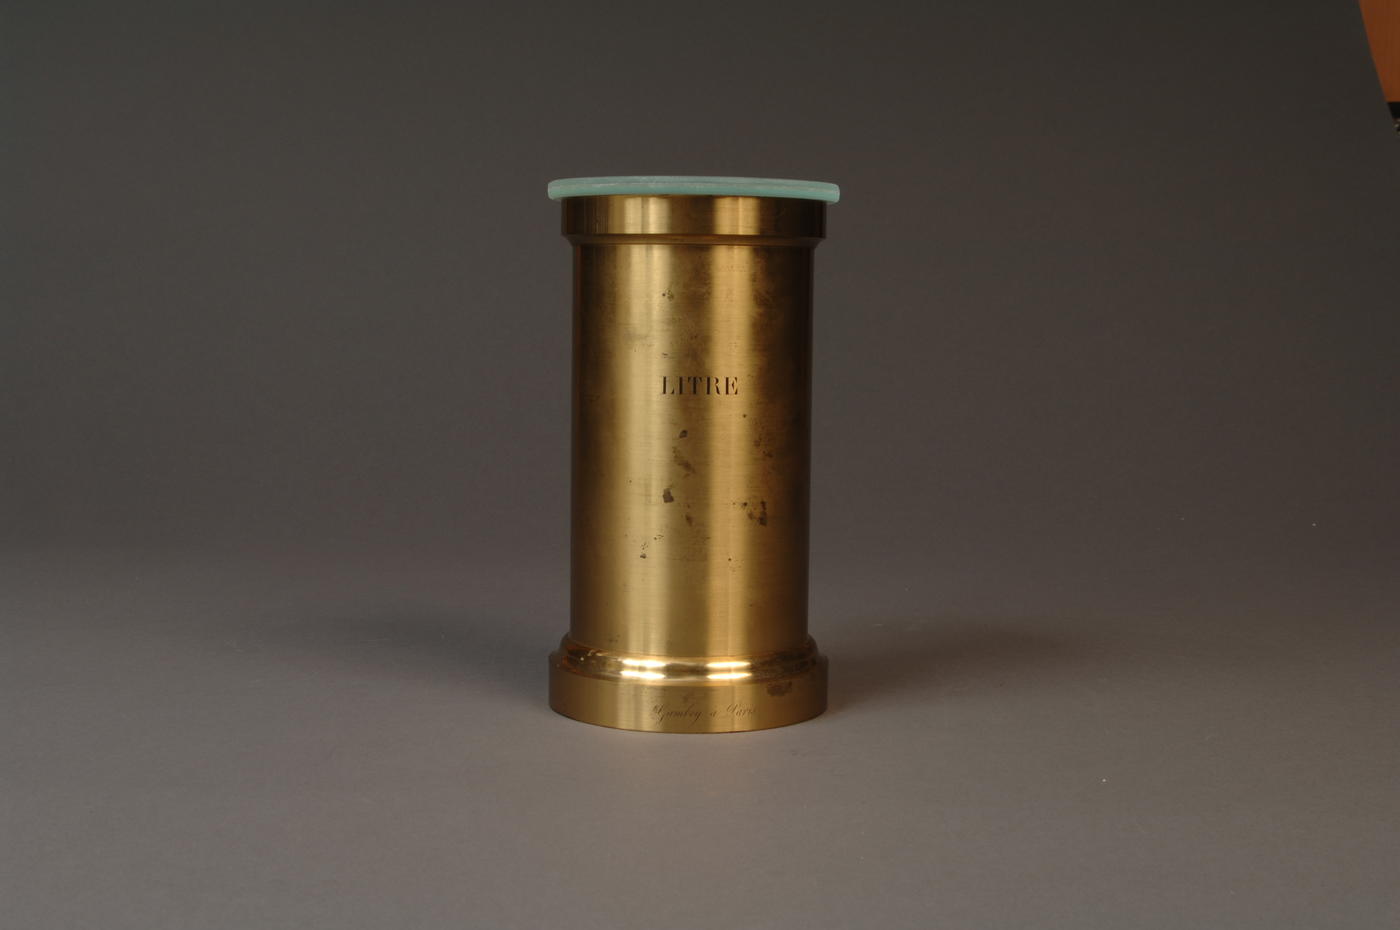 Brass volumetric standard that says "litre" on front, with glass cover on the top